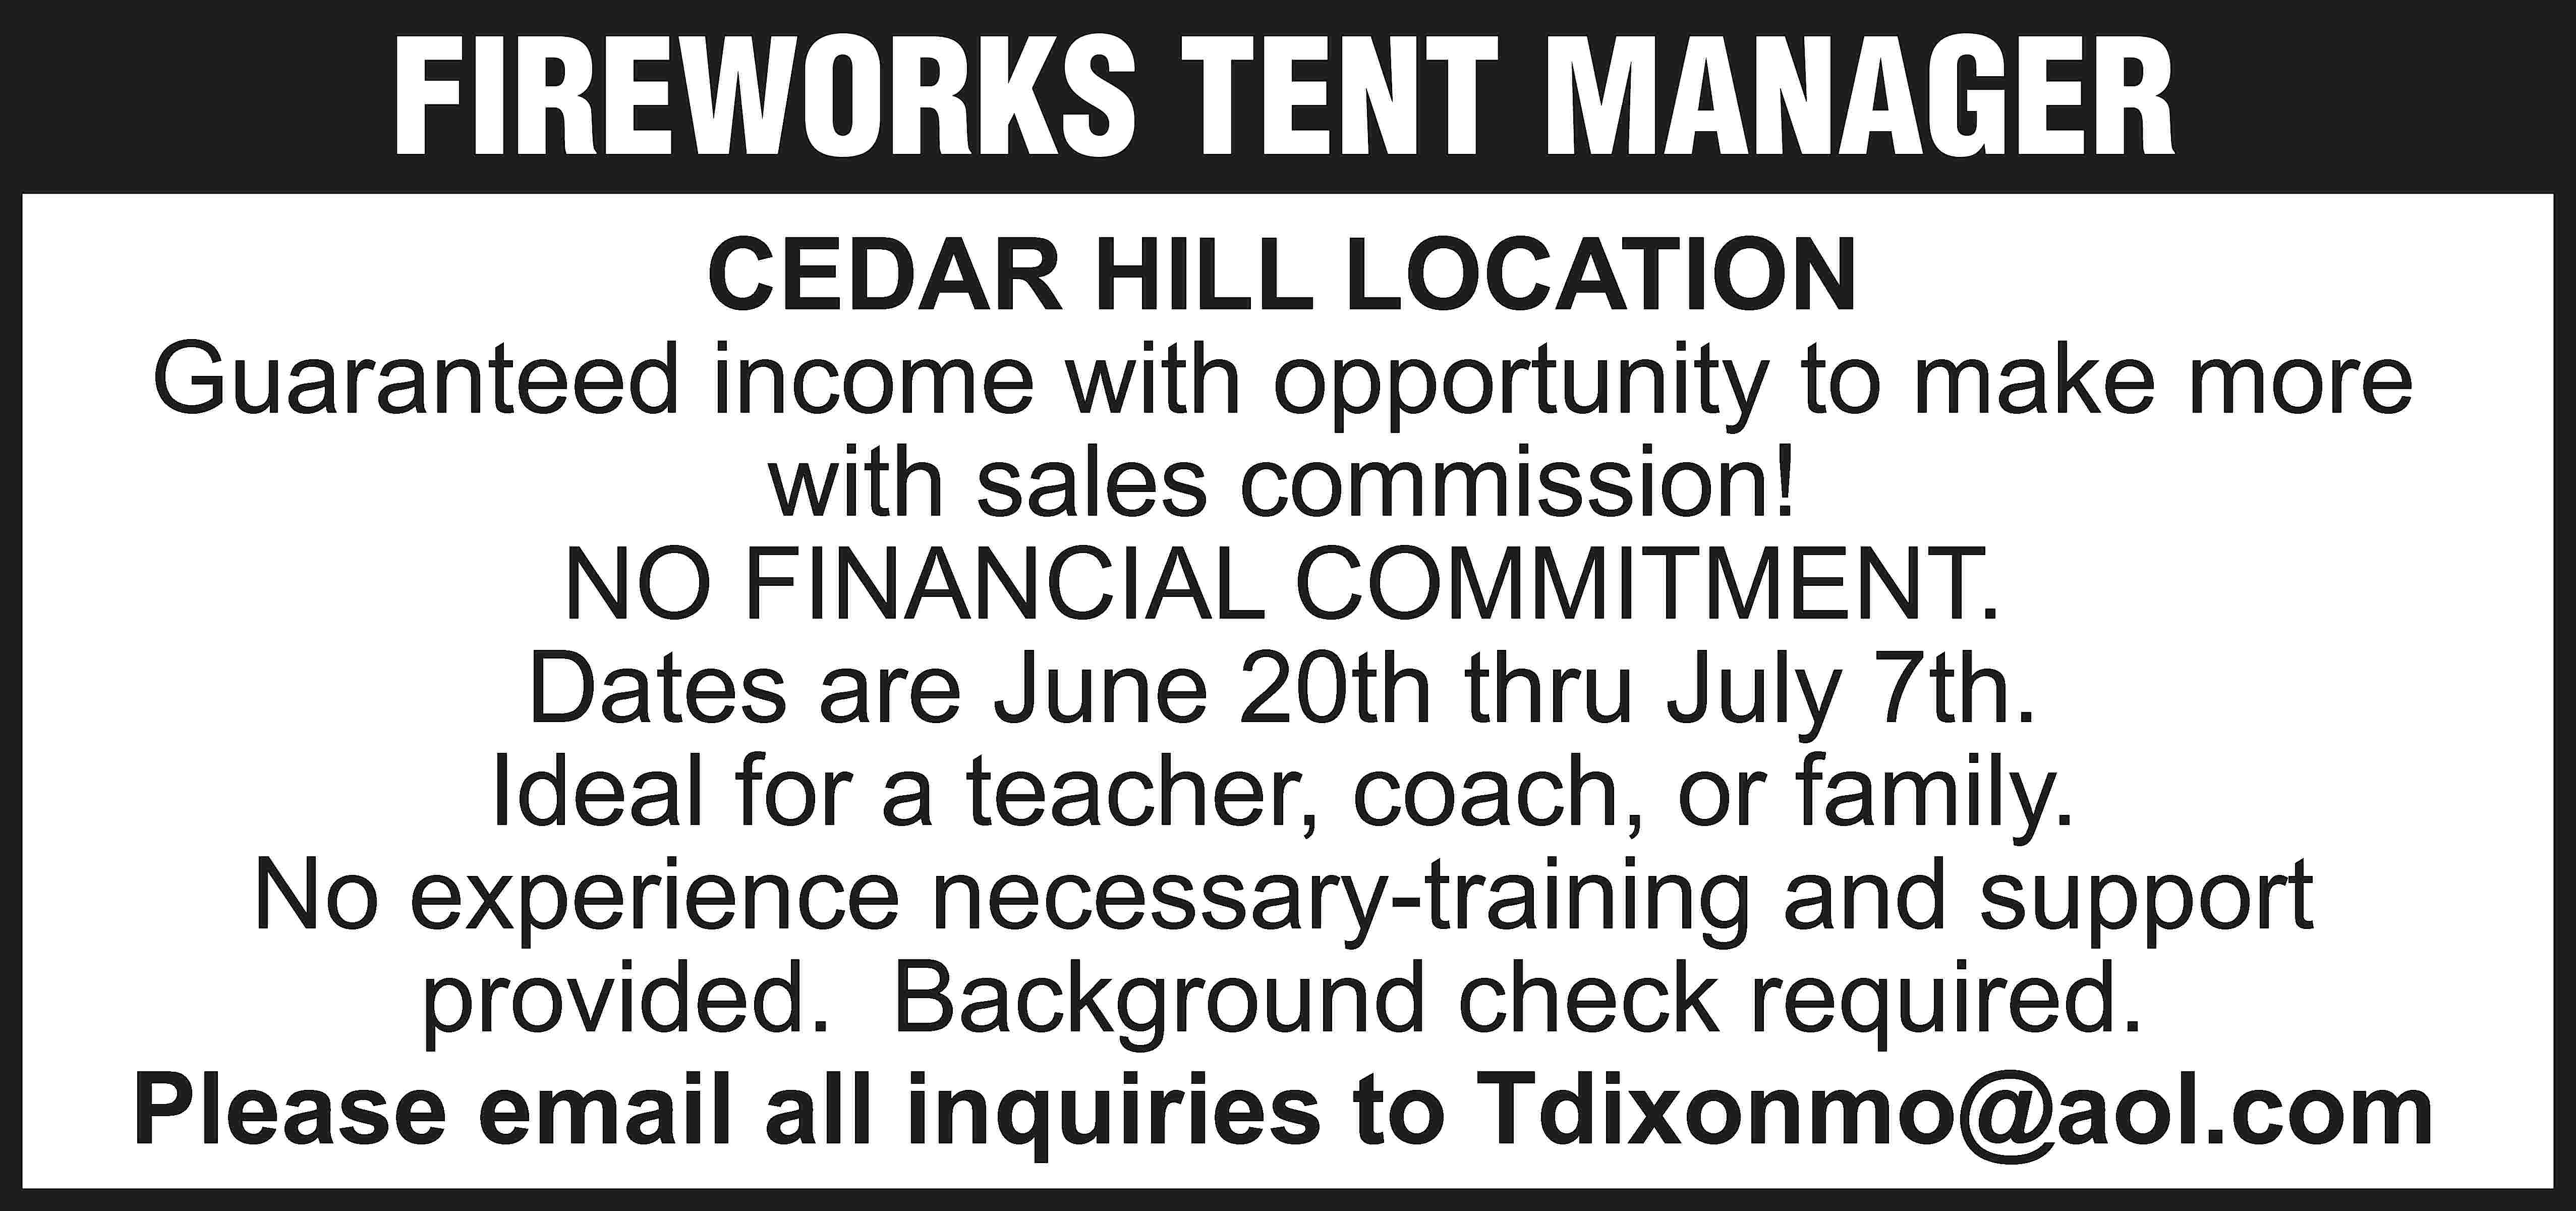 FIREWORKS TENT MANAGER CEDAR HILL  FIREWORKS TENT MANAGER CEDAR HILL LOCATION Guaranteed income with opportunity to make more with sales commission! NO FINANCIAL COMMITMENT. Dates are June 20th thru July 7th. Ideal for a teacher, coach, or family. No experience necessary-training and support provided. Background check required. Please email all inquiries to Tdixonmo@aol.com